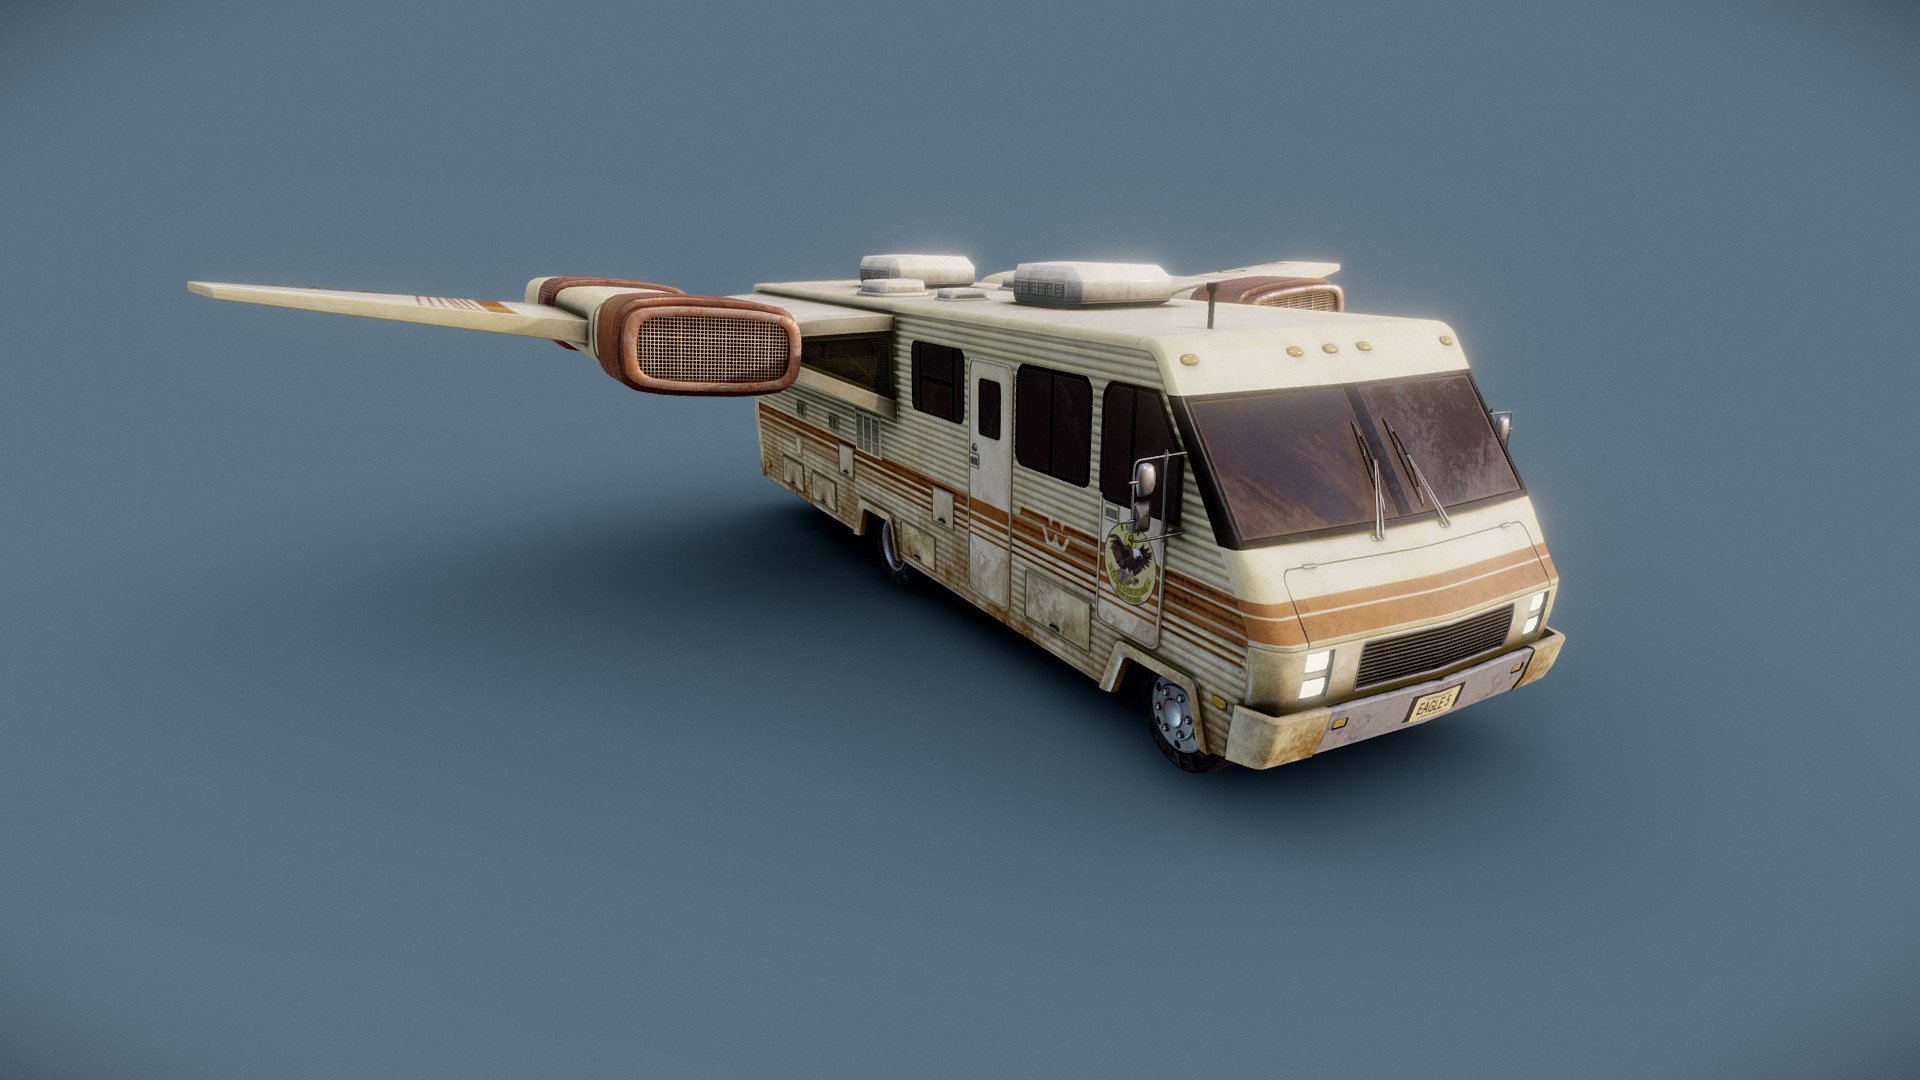 I watched Spaceballs recently and I had this old RV model I was making for Breaking Bad scene, soo&hellip; Here is a modified RV from Spaceballs :). This was made to be used in game engines or VR/AR






 - Spaceballs RV - Download Free 3D model by Warkarma 3d model